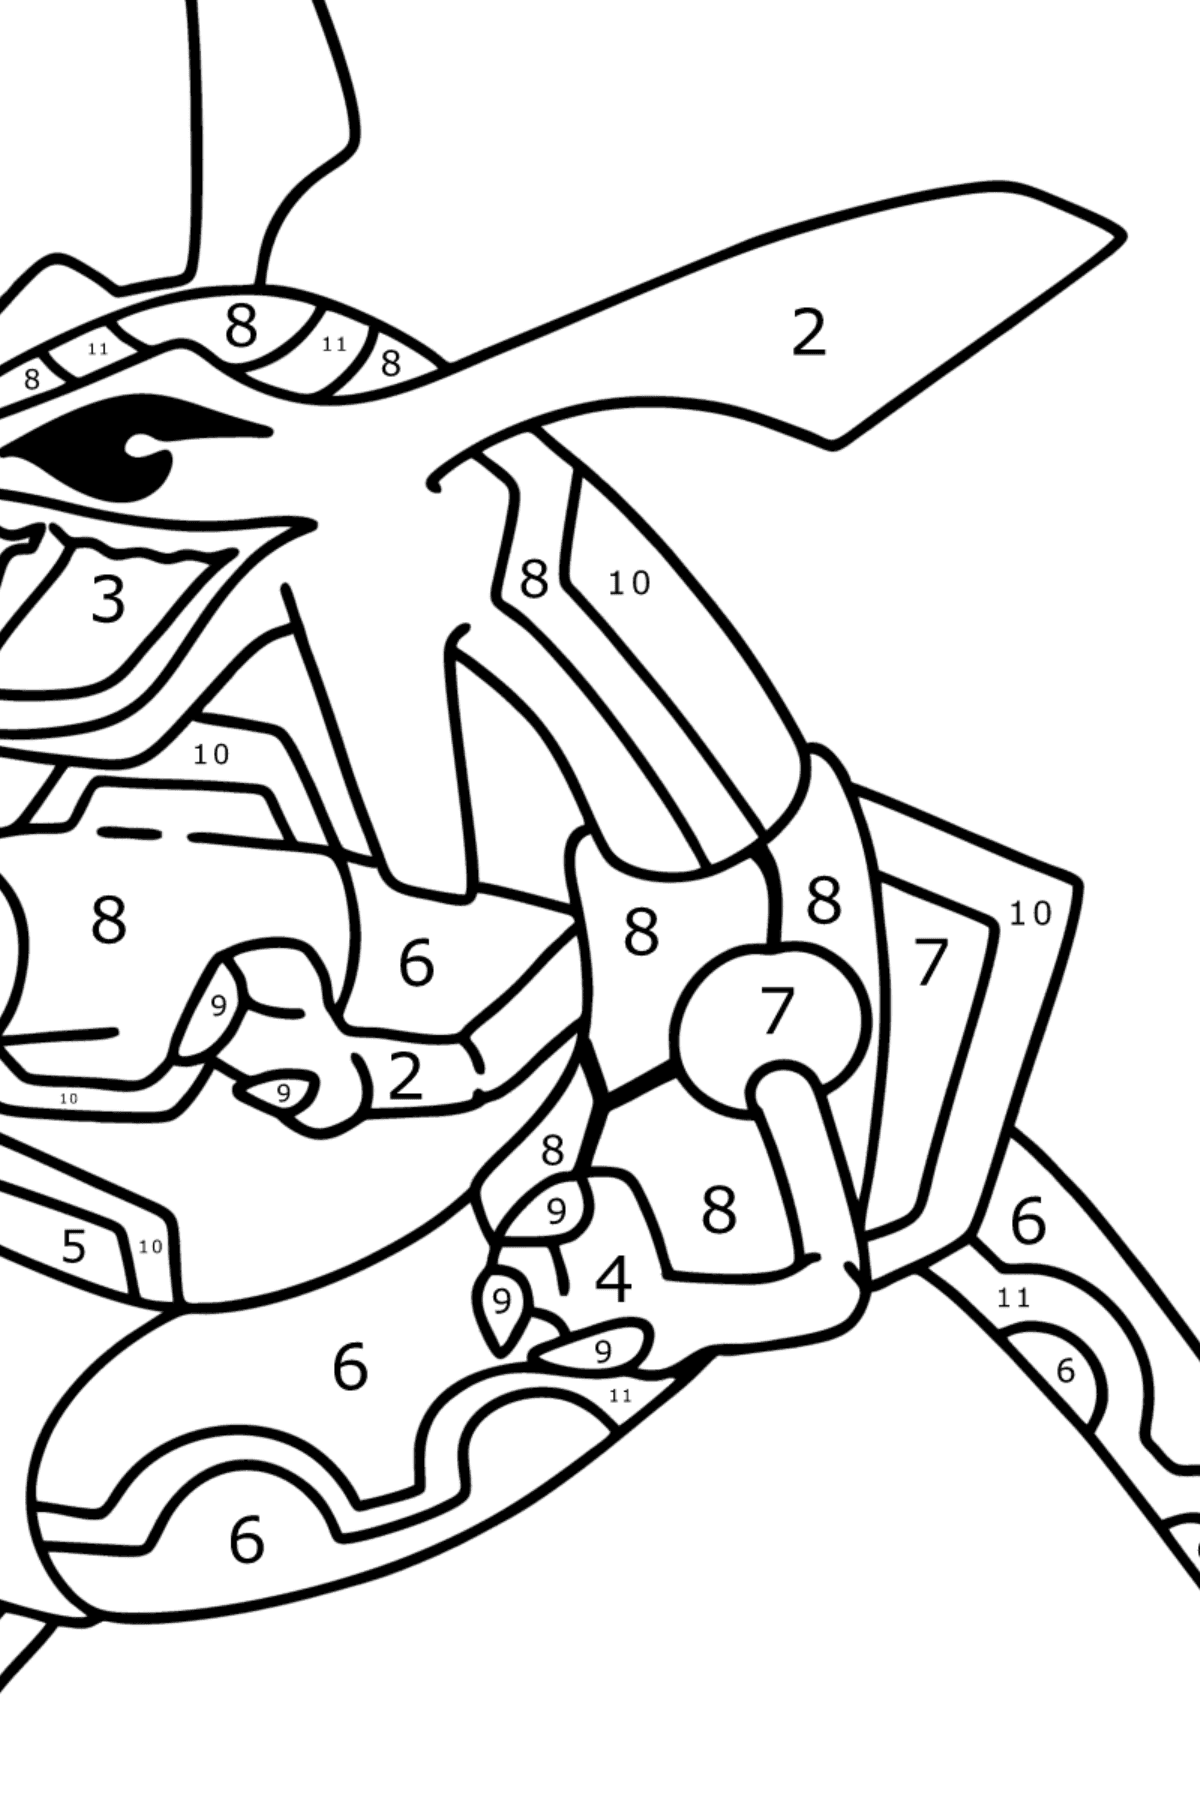 Coloring page Pokemon Go Rayquaza - Coloring by Numbers for Kids